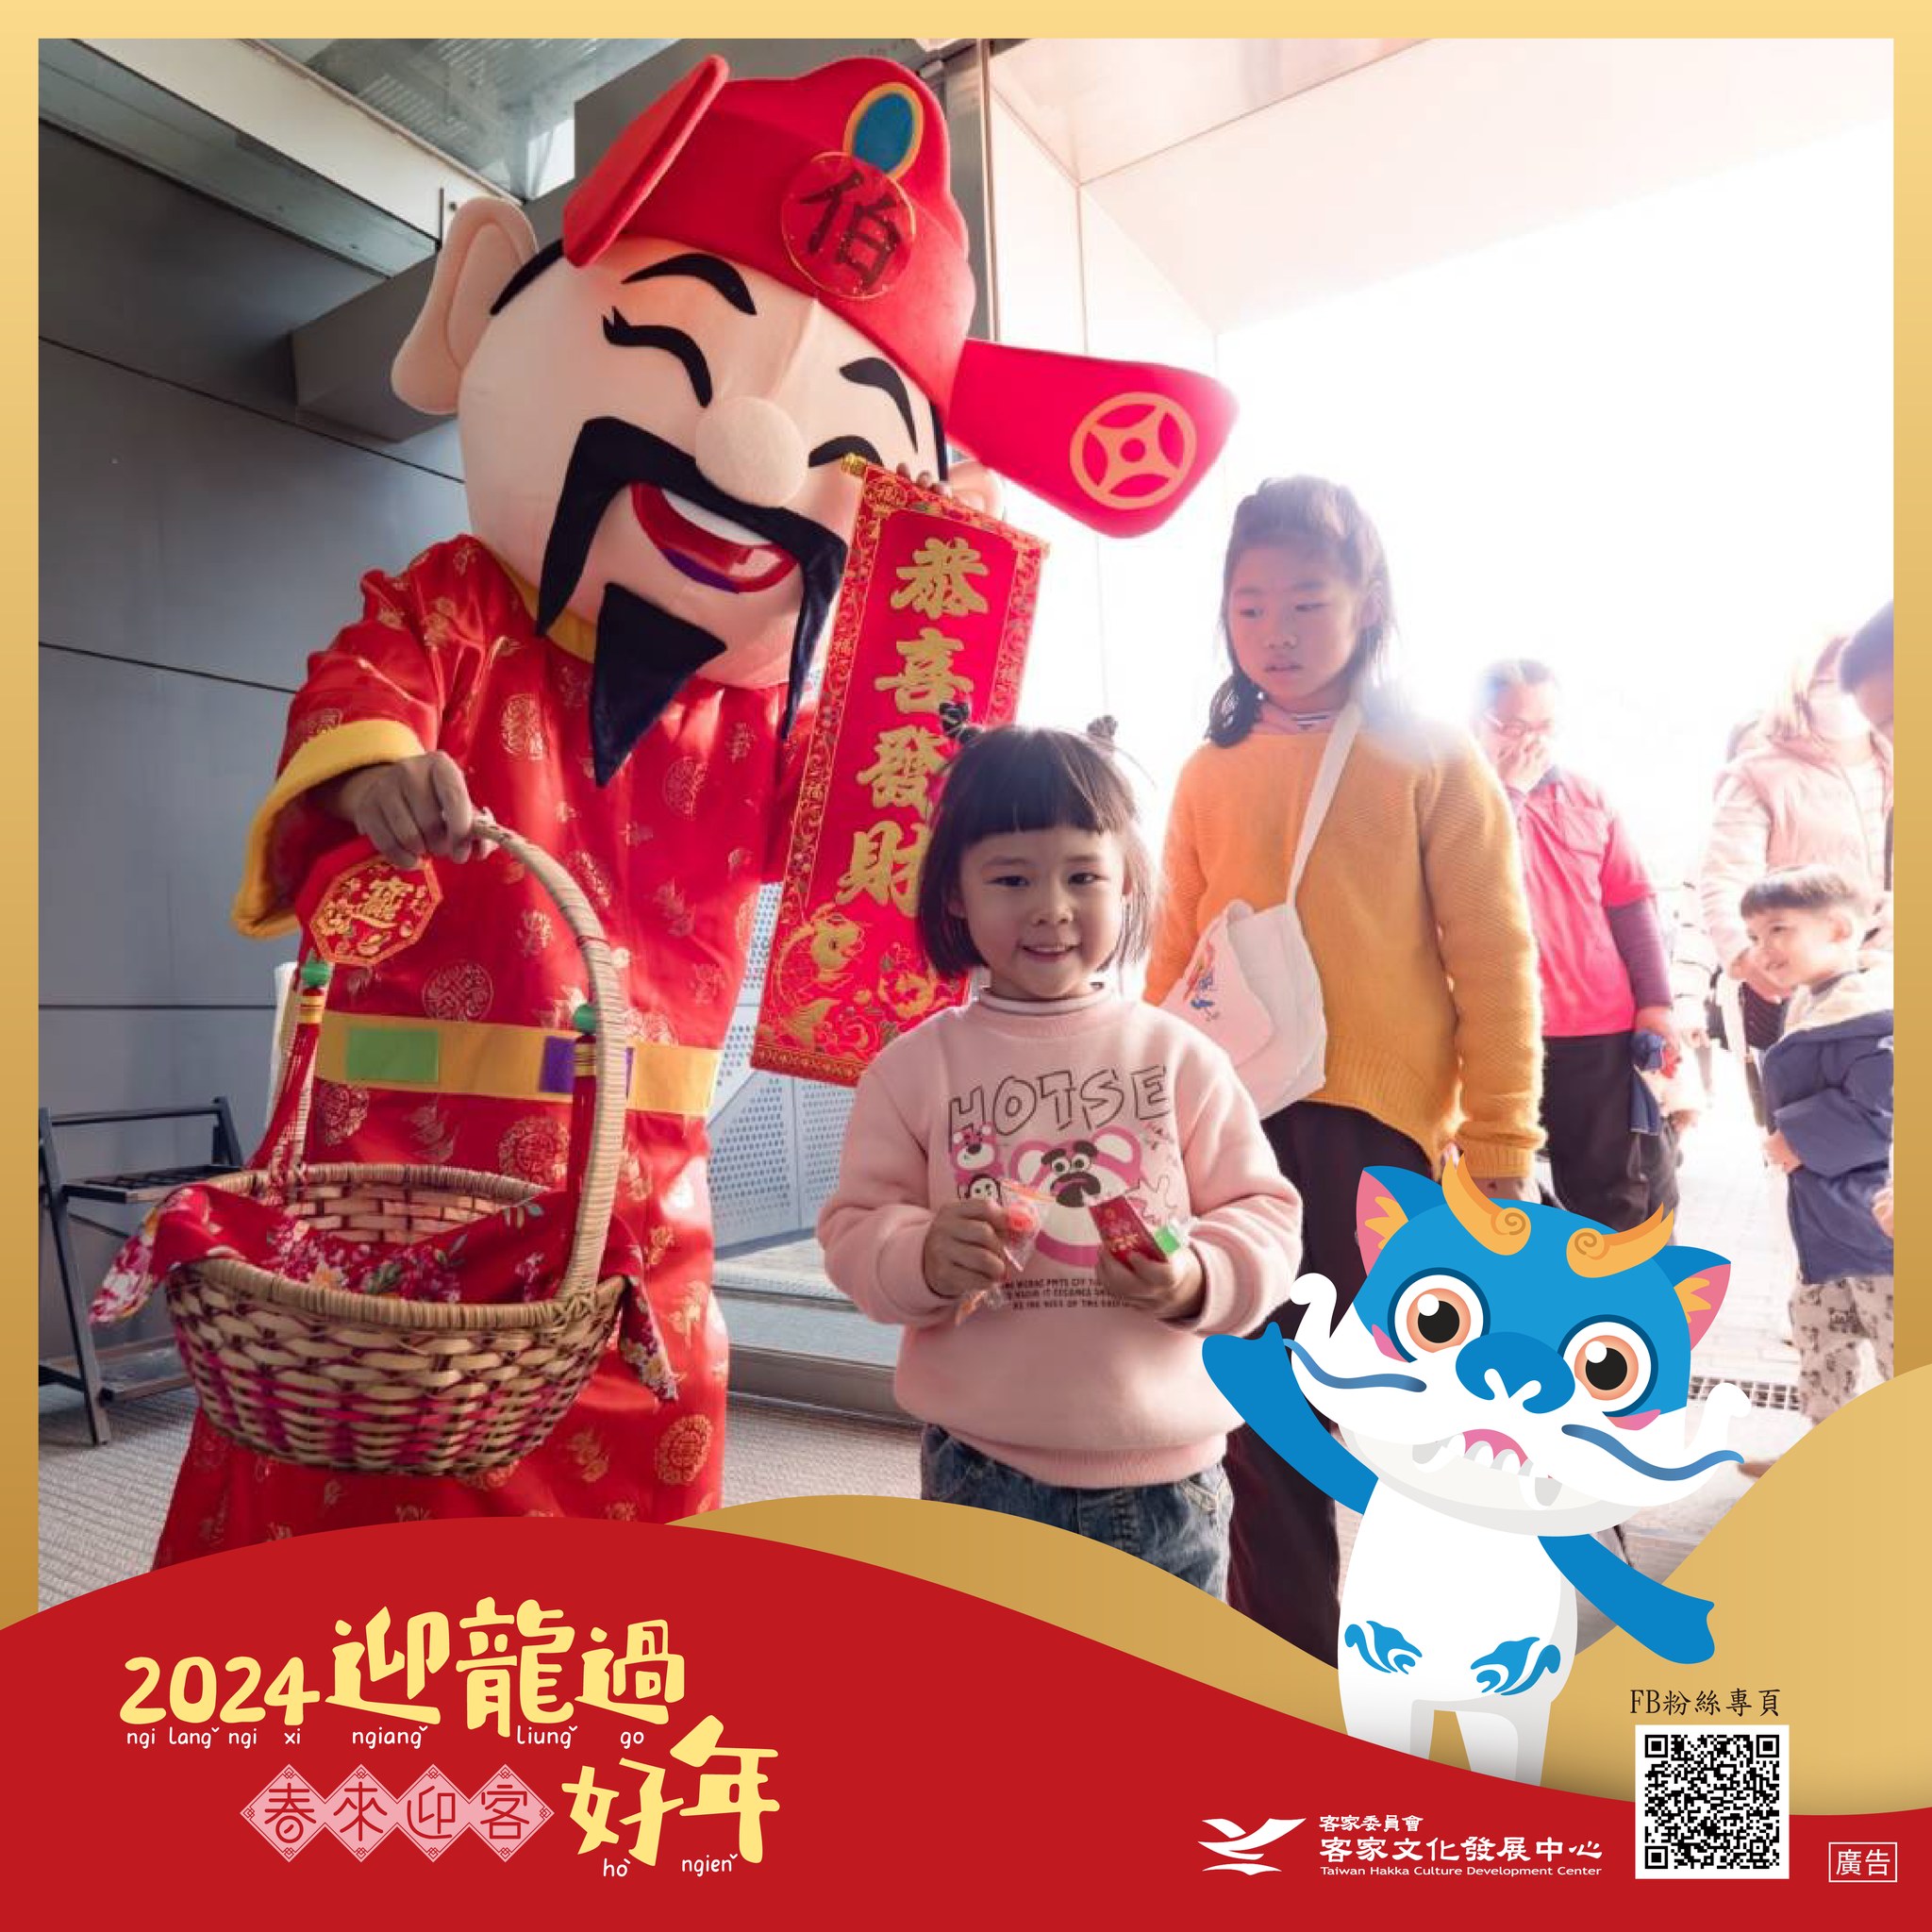 Visitors Taking Photo With The God Of Fortune Mascot